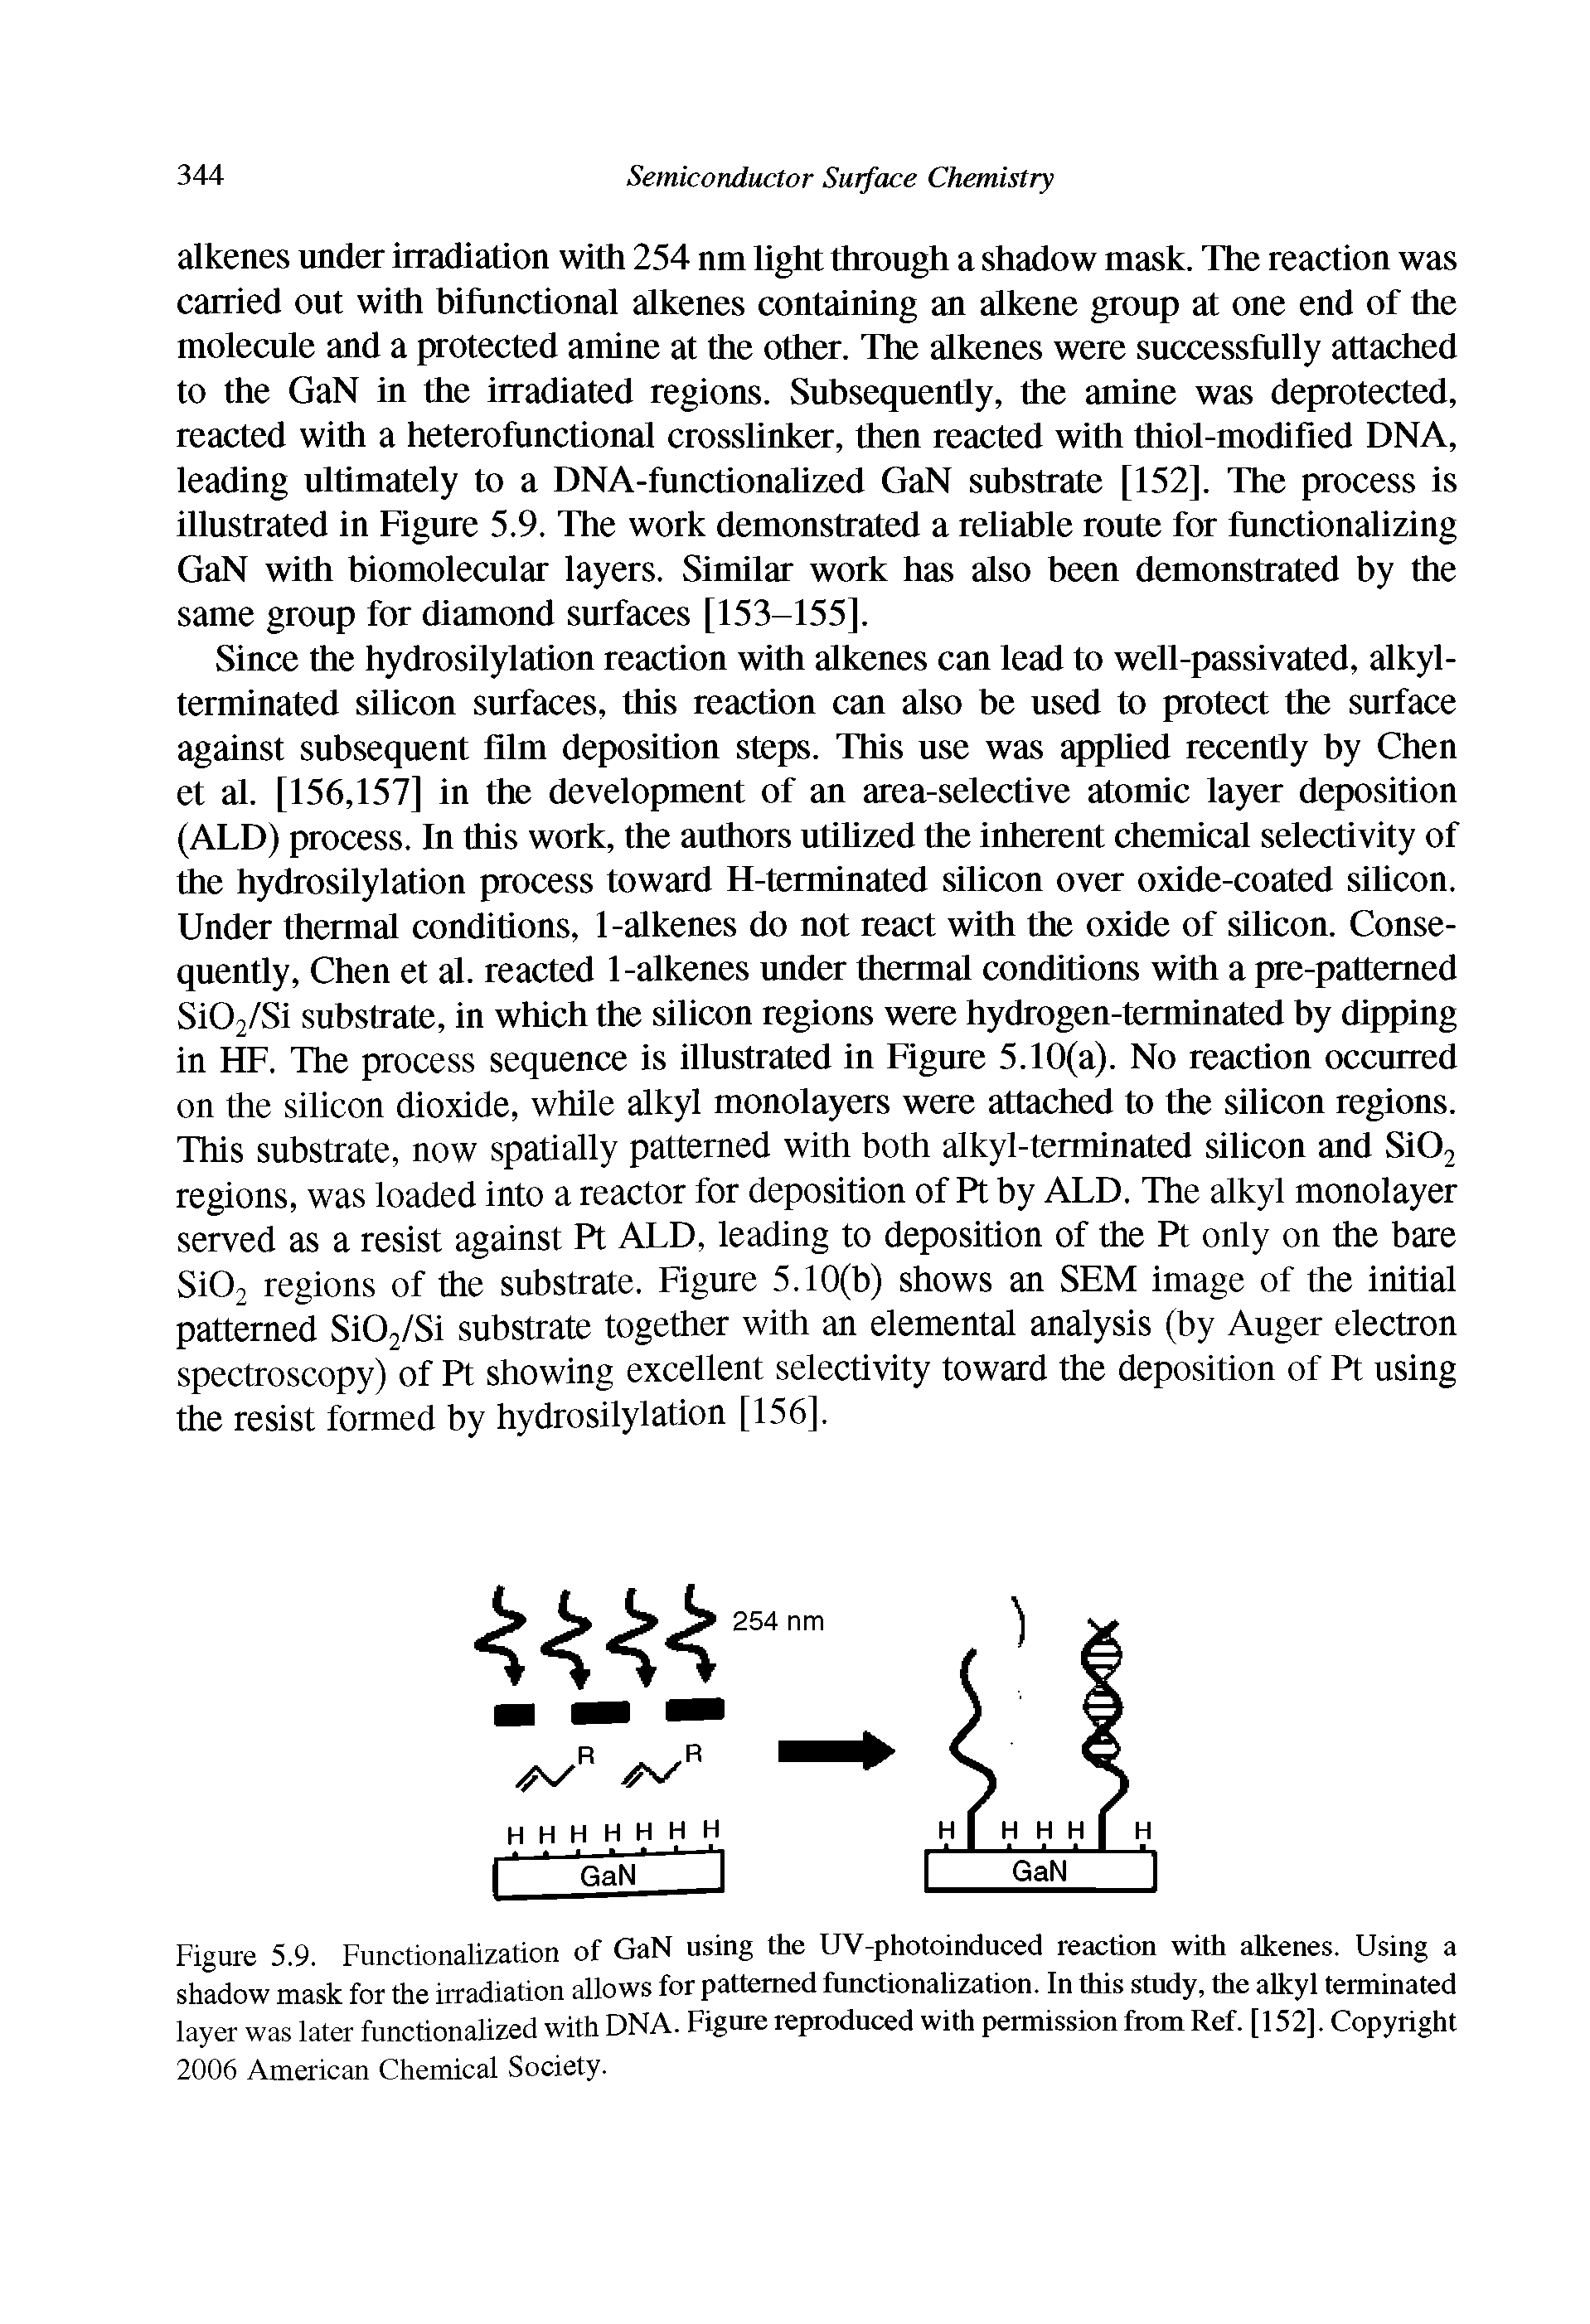 Figure 5.9. Functionalization of GaN using the UV-photoinduced reaction with alkenes. Using a shadow mask for the irradiation allows for patterned functionalization. In this study, the alkyl terminated layer was later functionalized with DNA. Figure reproduced with permission from Ref. [152]. Copyright...